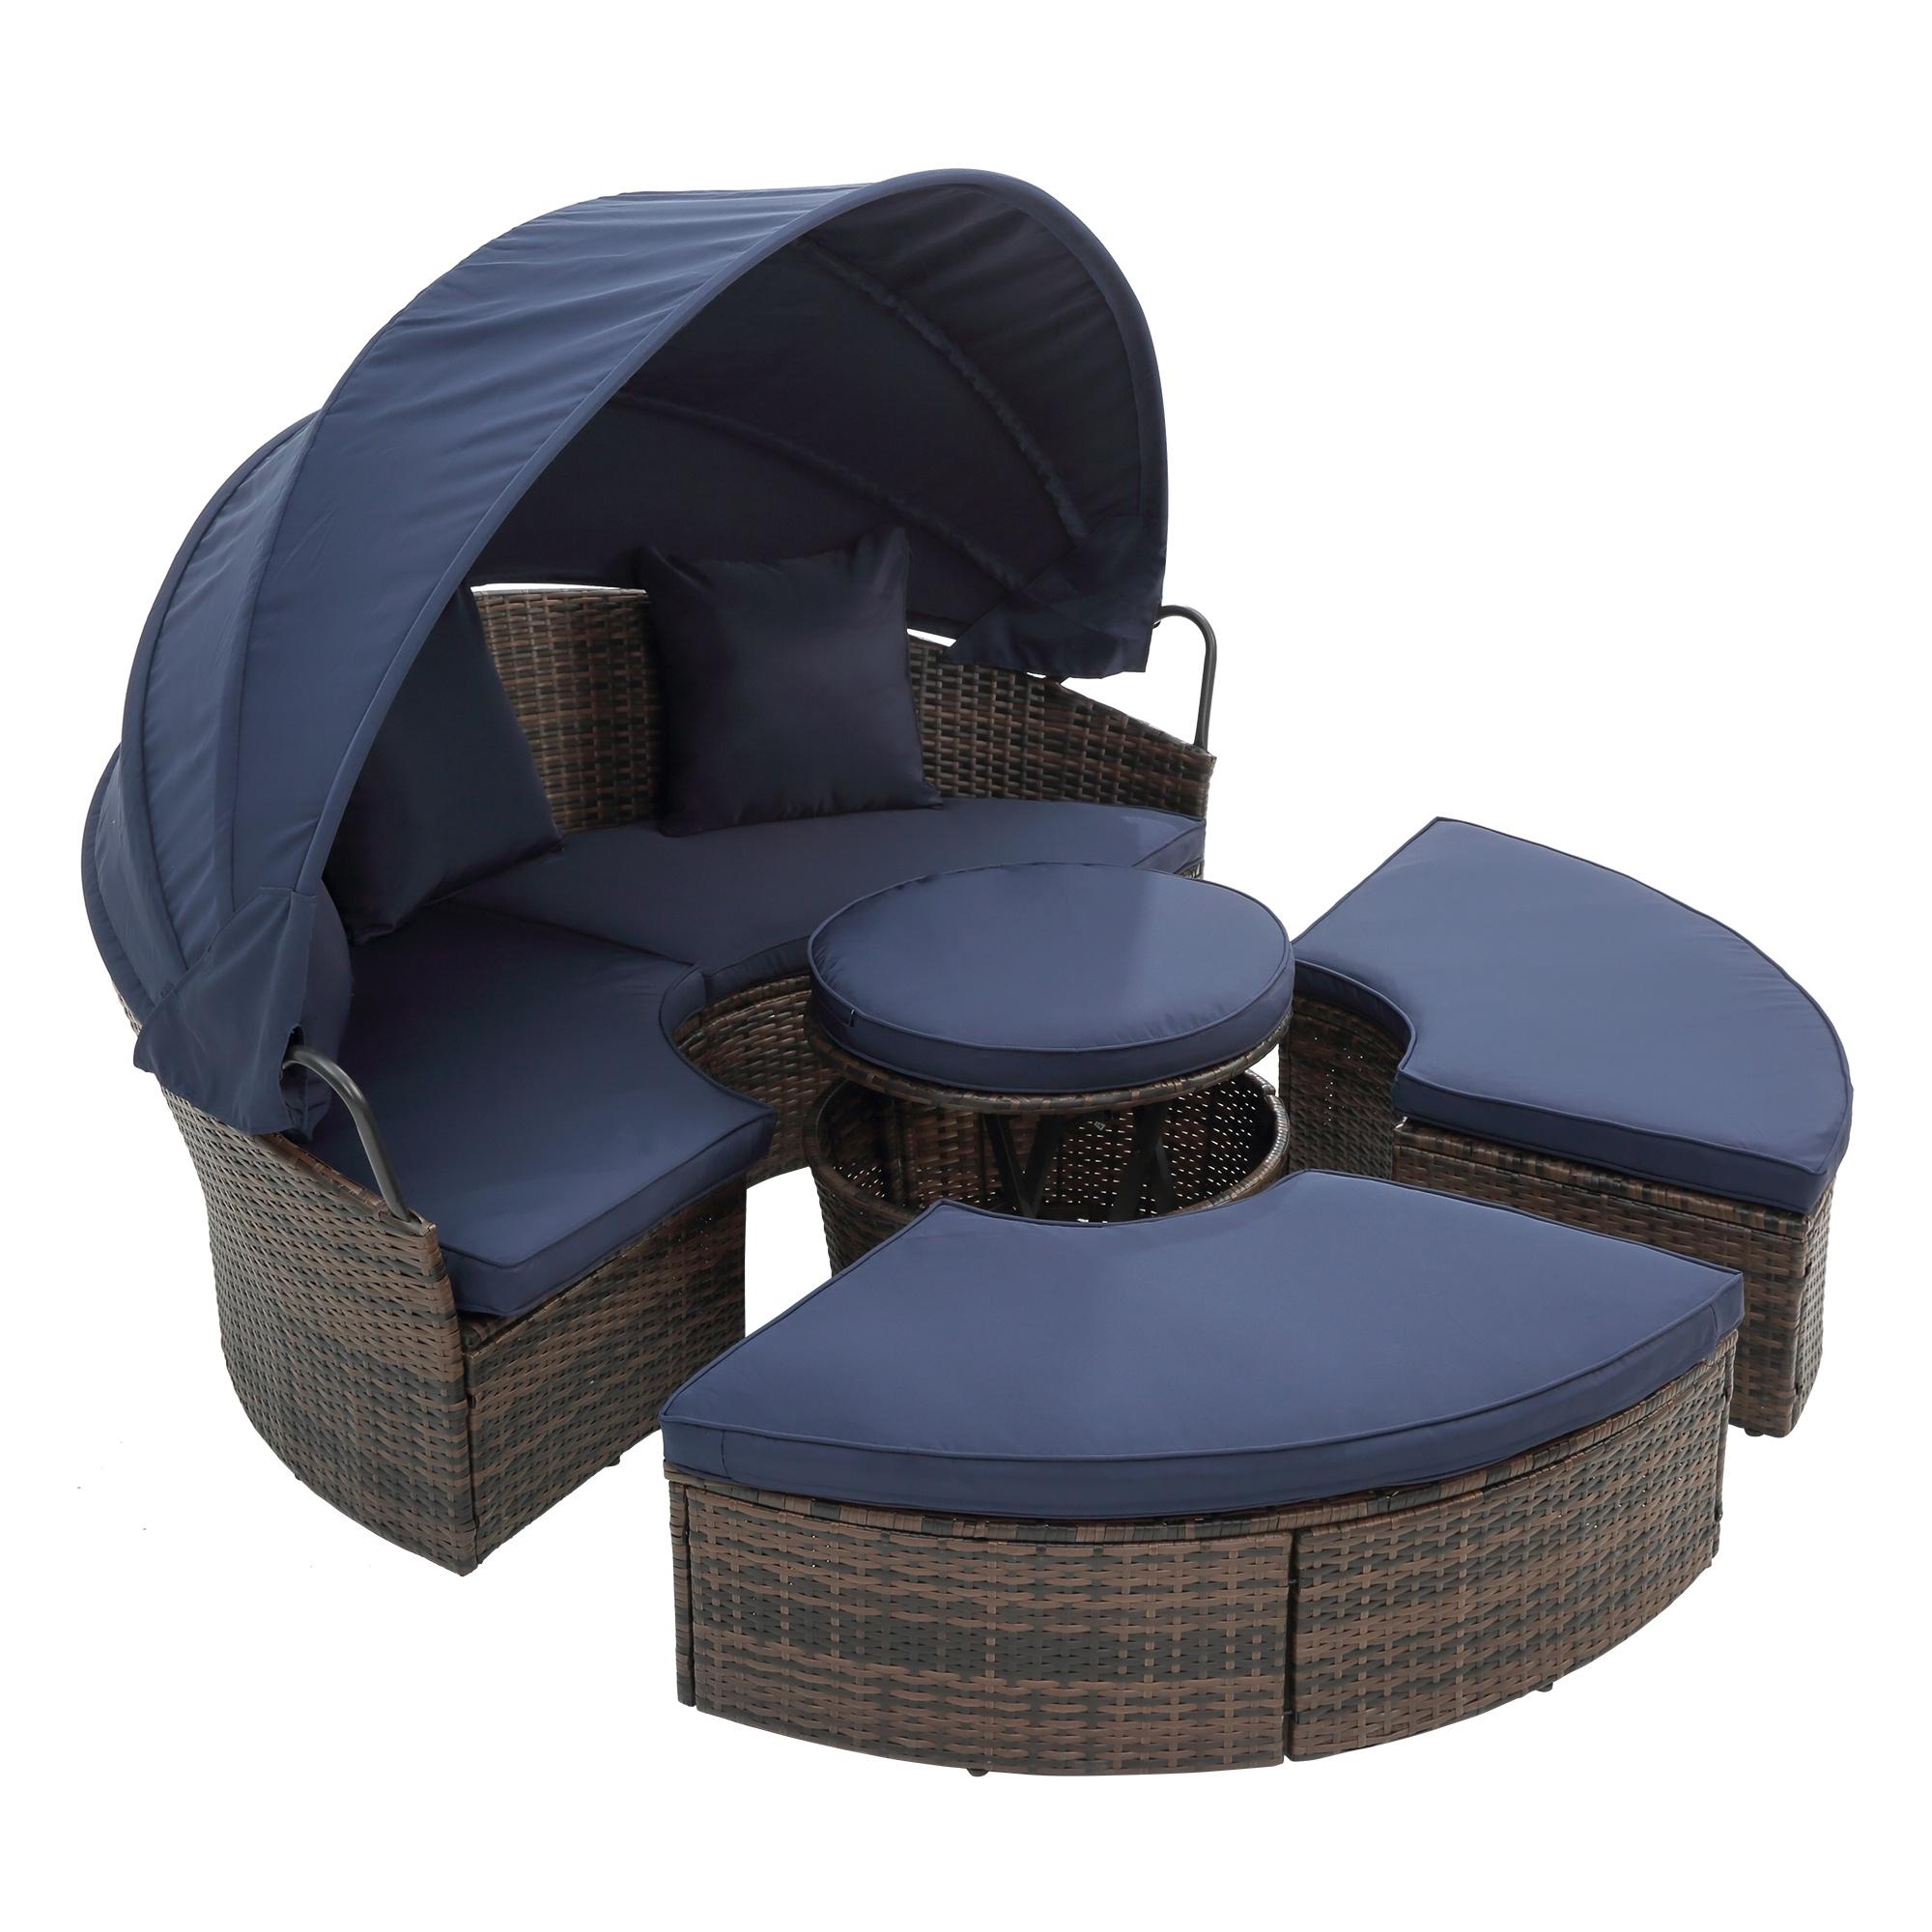 6 Pieces Patio Furniture Set, Outdoor Wicker Sunbed Daybed with Canopy, Cushioned Sectional Sofa Set, Backyard Conversation Set with Coffee Table, for Poolside, Lawn, Deck, Garden, Blue, D6311 - image 3 of 9